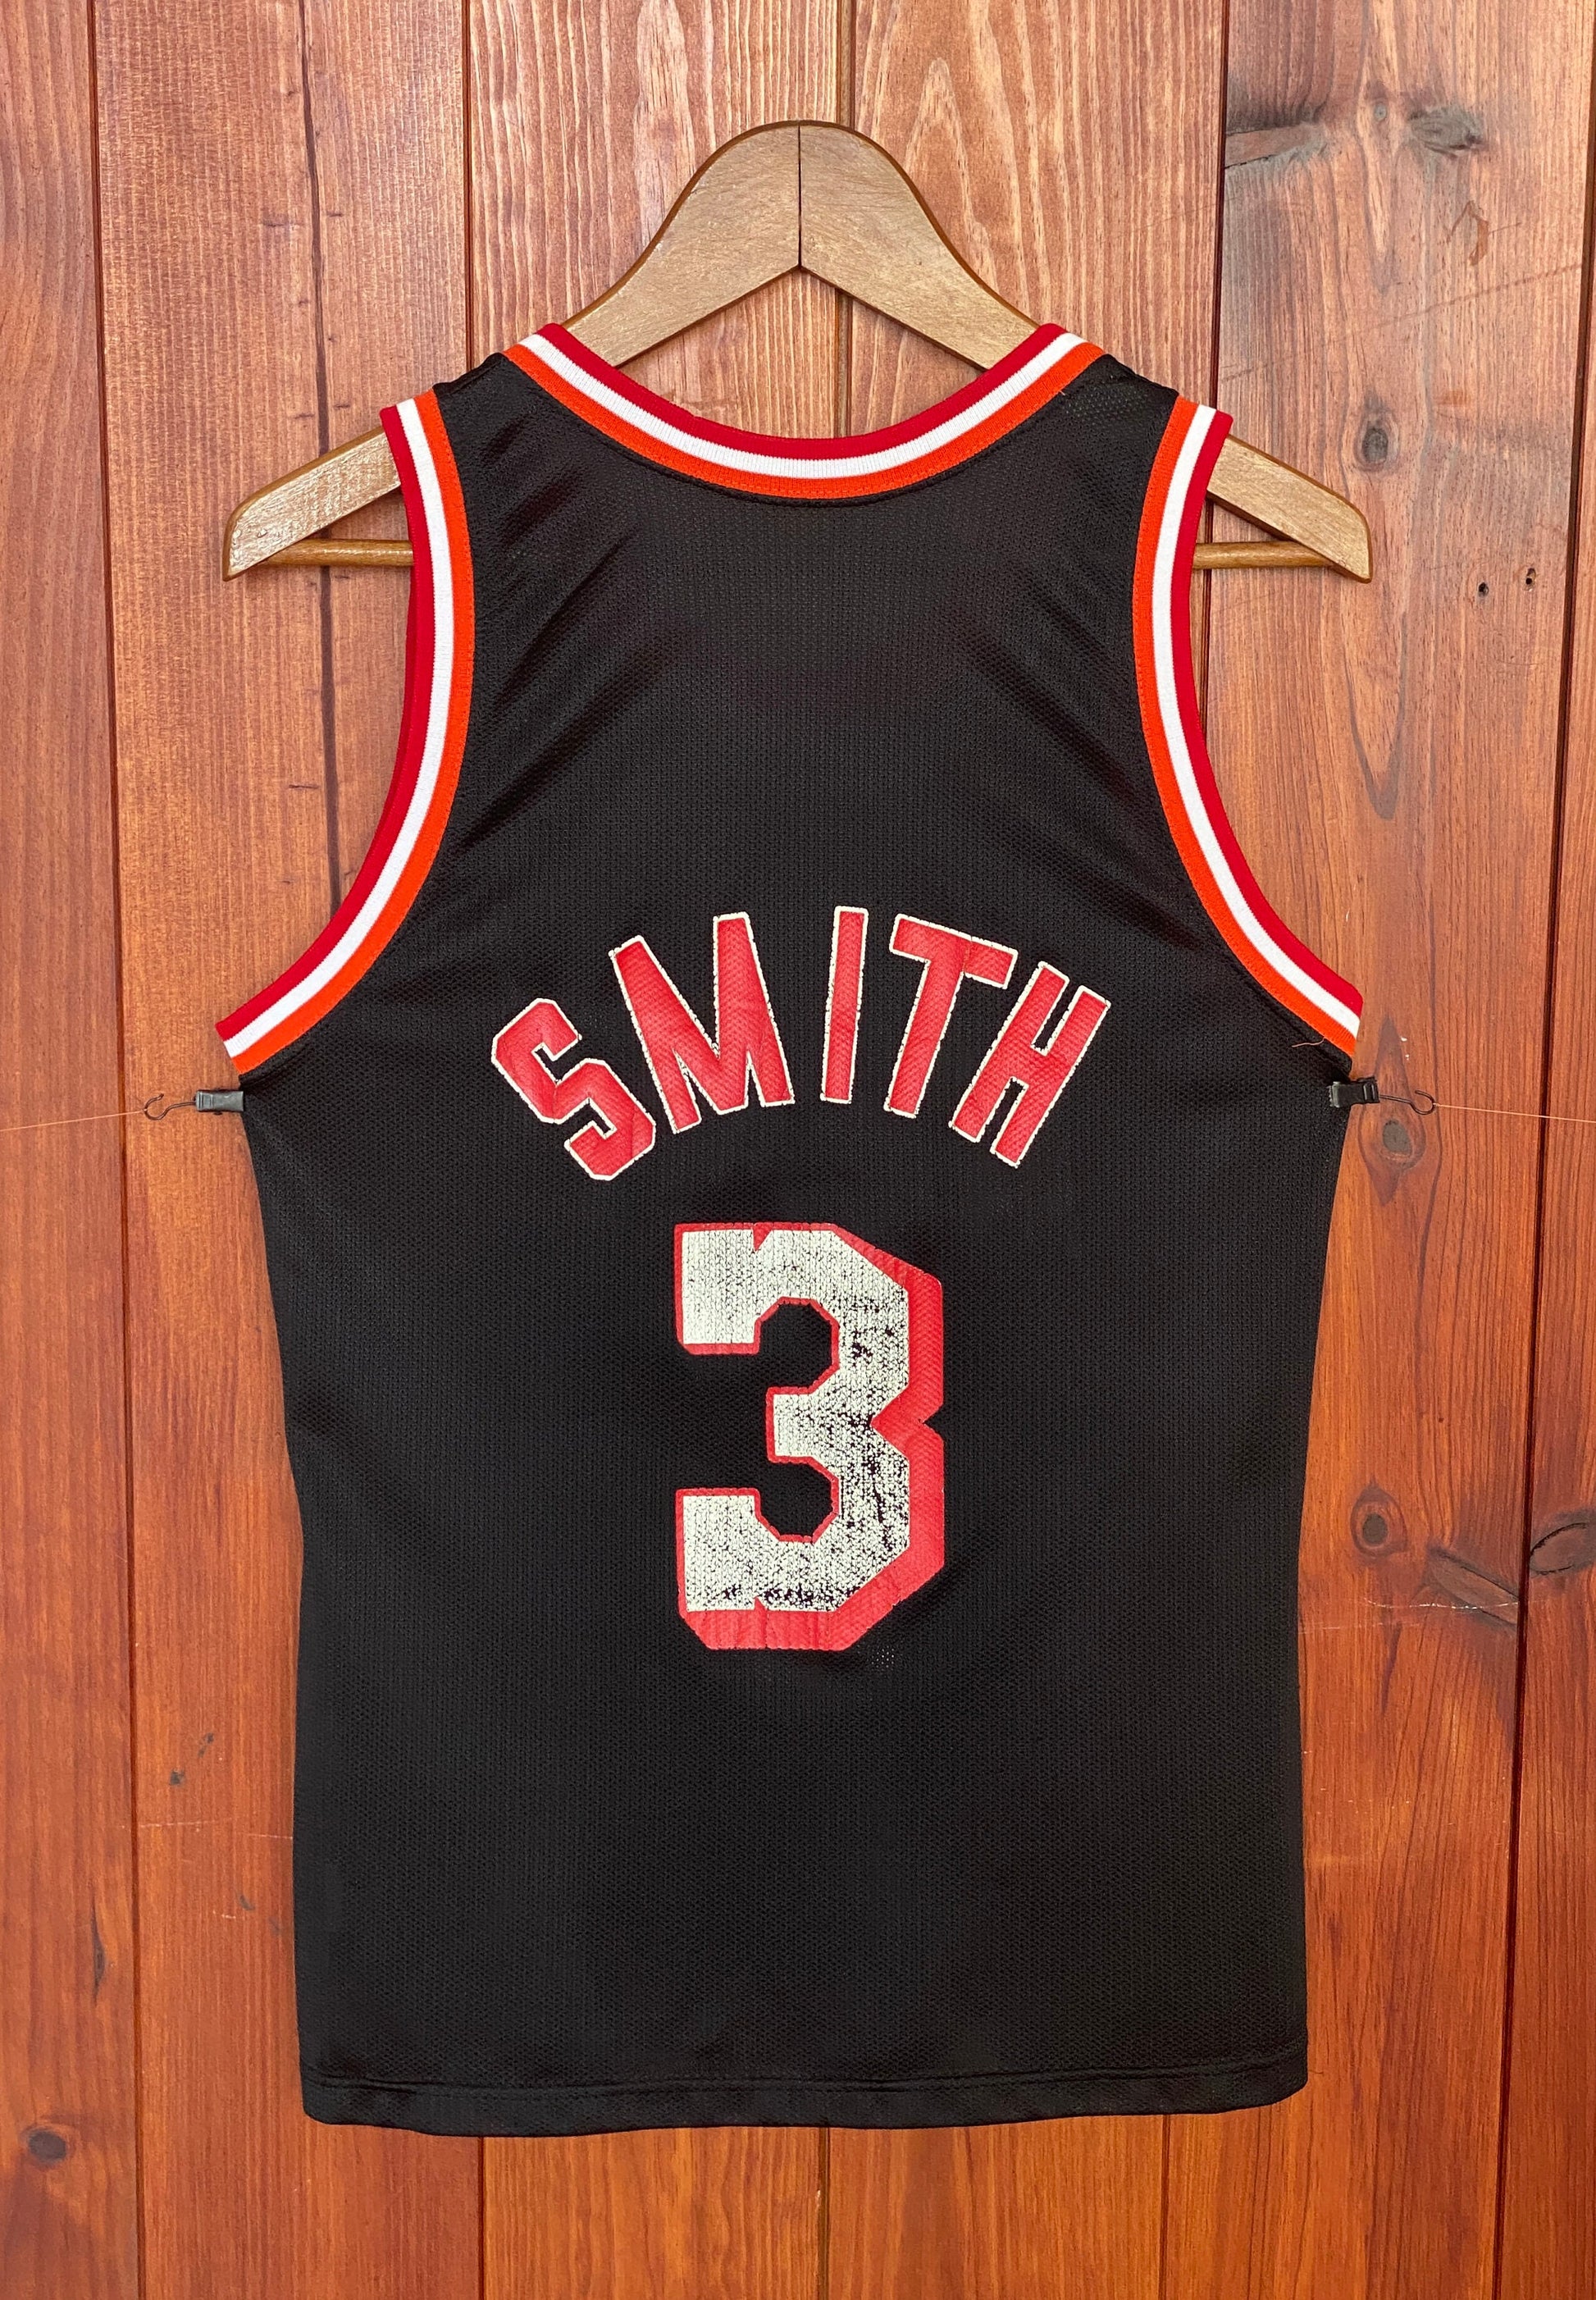 Miami Heat Vintage 90s #3 Smith NBA Jersey Made in USA - Size 36 US